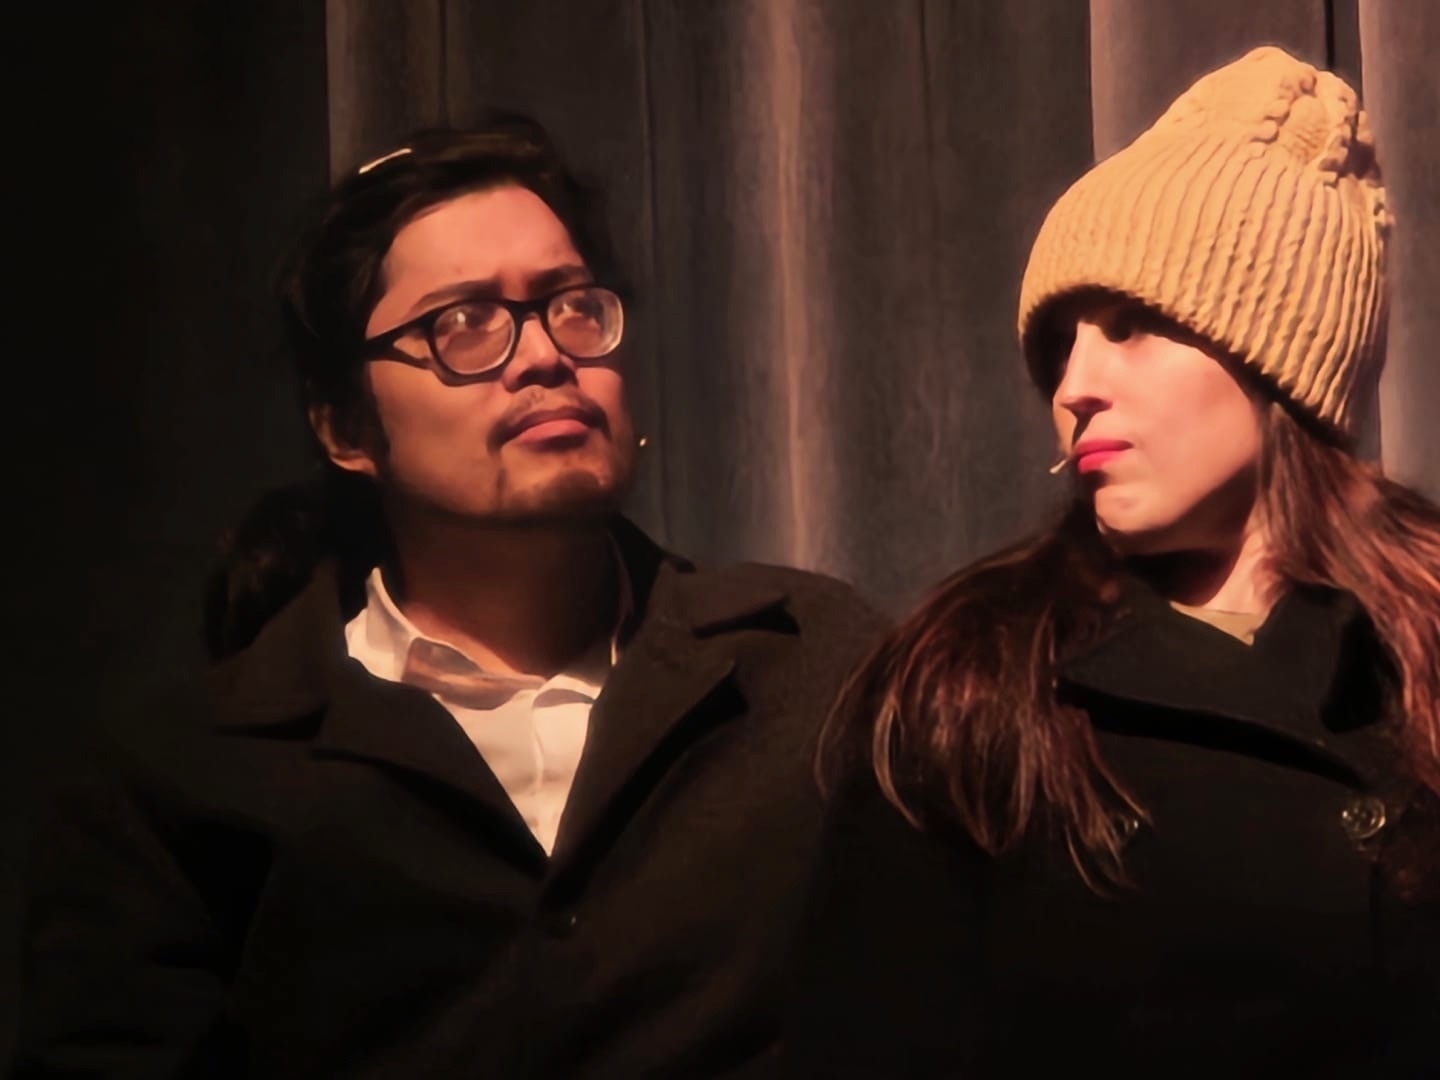 A man and a woman wearing winter attire, with the man looking up to the side and the woman looking away with a toothpick in her mouth. They appear to be standing indoors, with a dimly lit, curtain-like background.